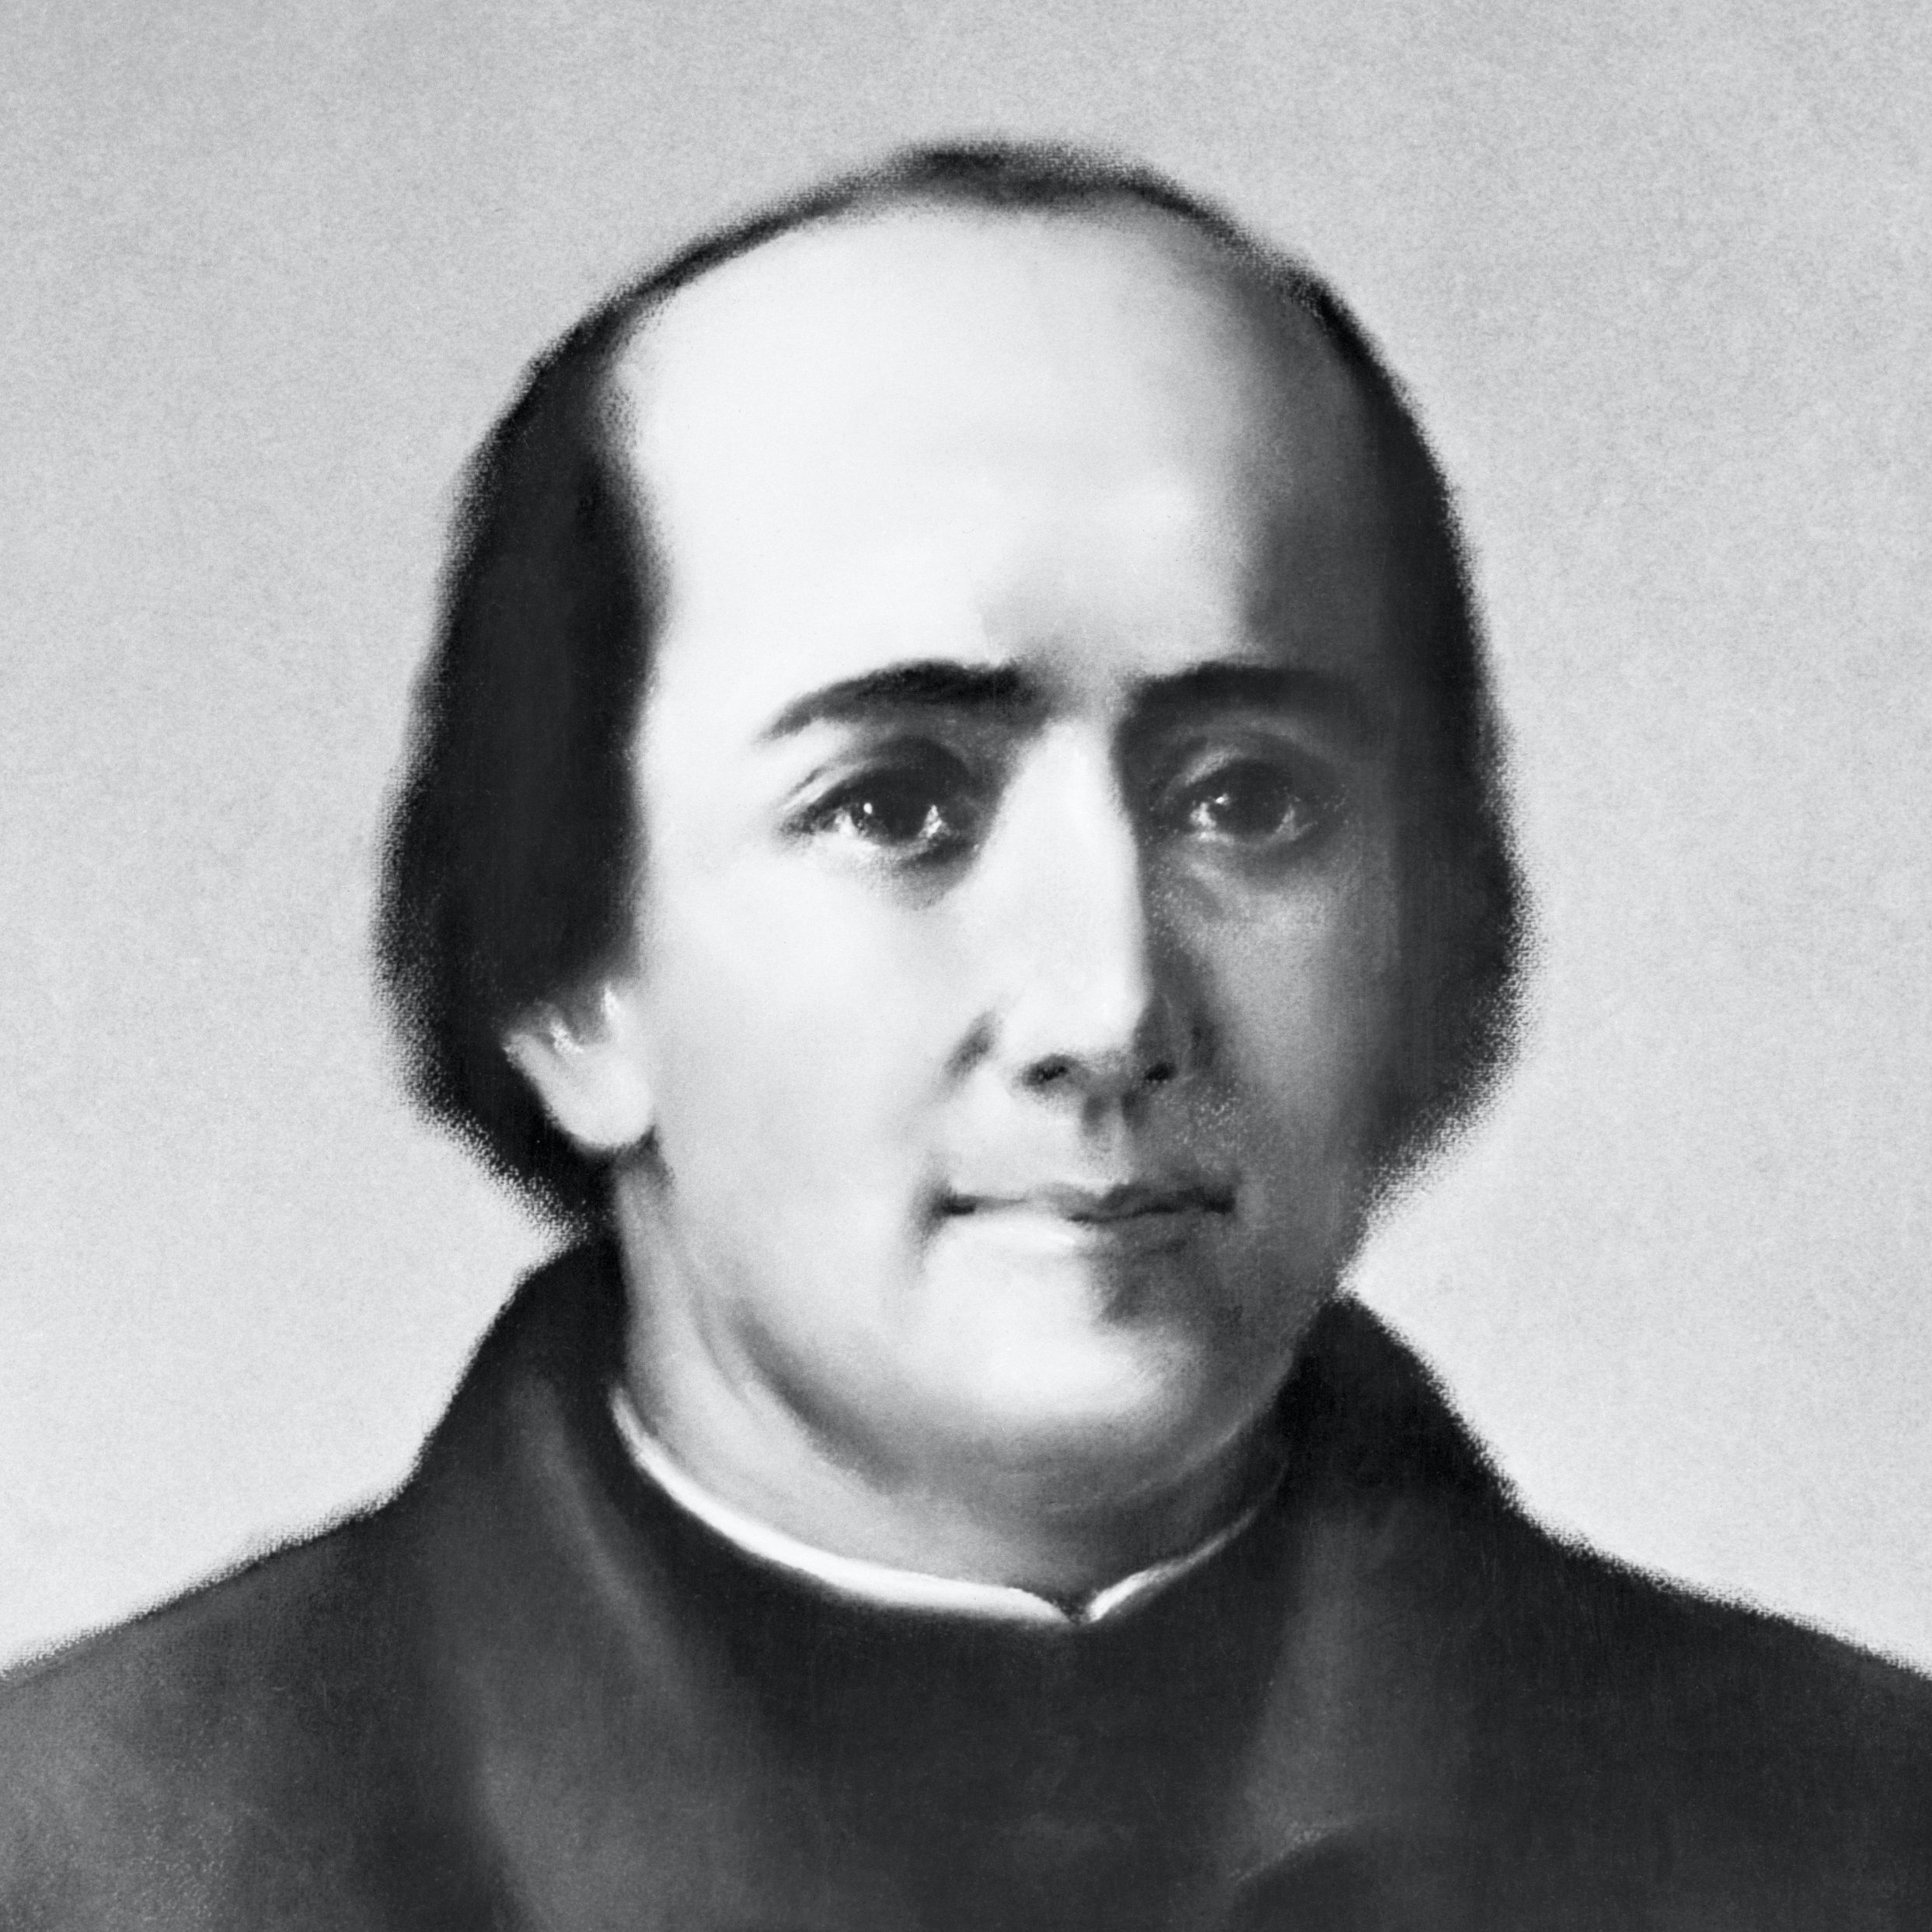 Jacques Marquette: Biography, French Missionary, Explorer